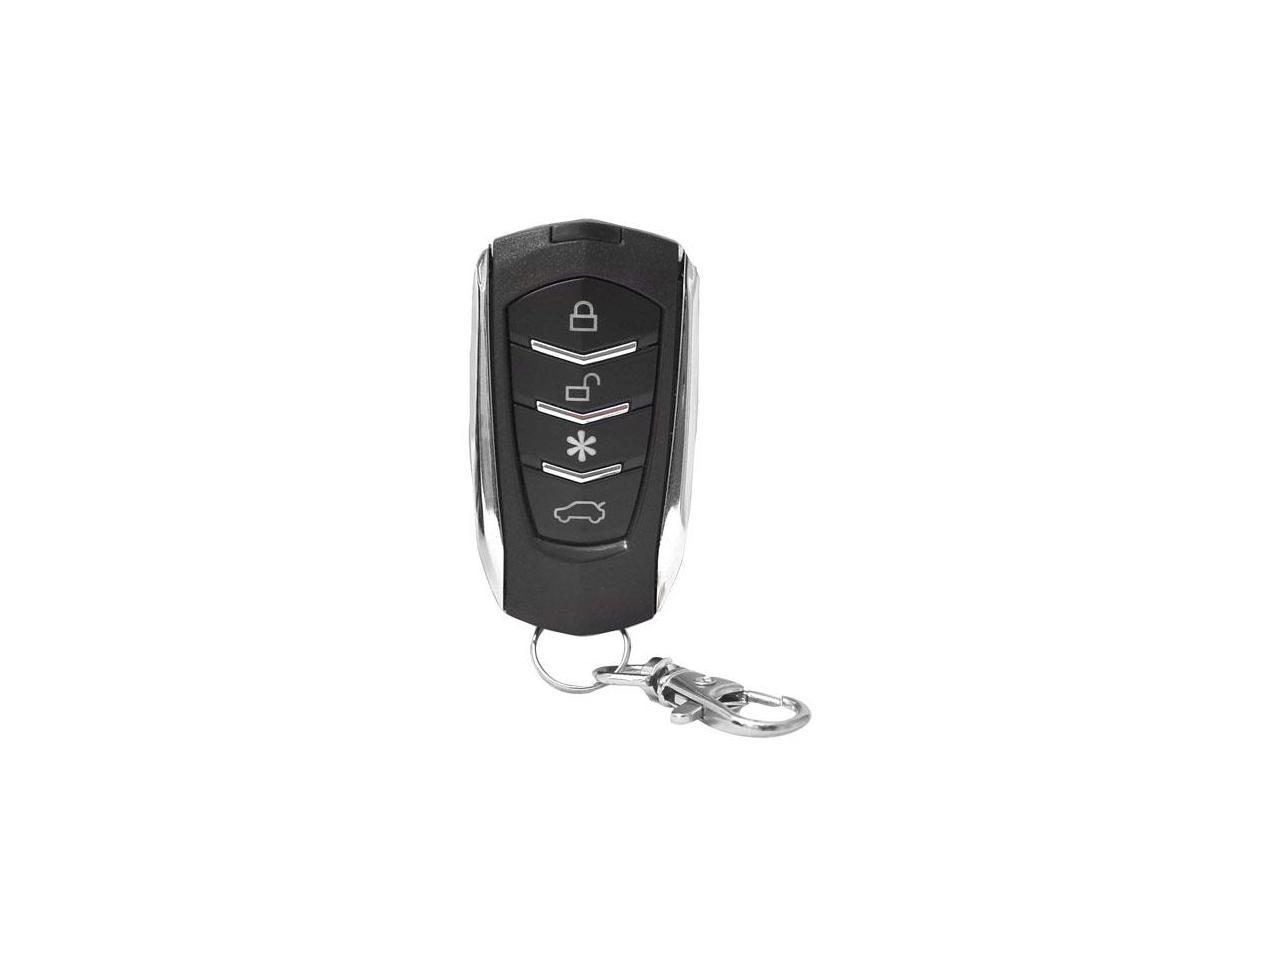 New Pyle PWD701 4-Button Remote Door Lock Vehicle Security System 